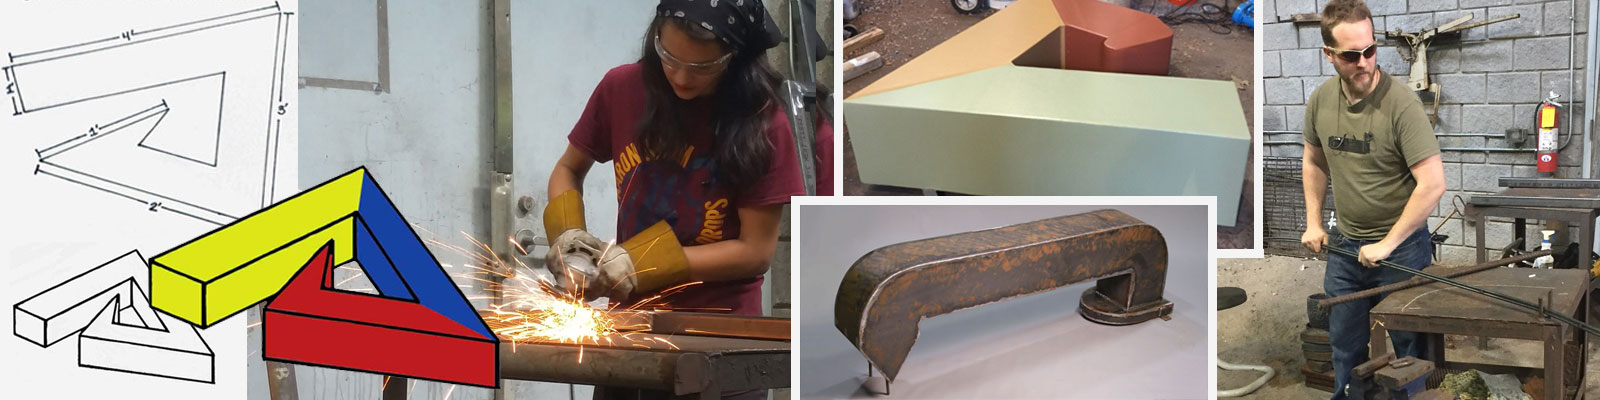 students work on bench project 